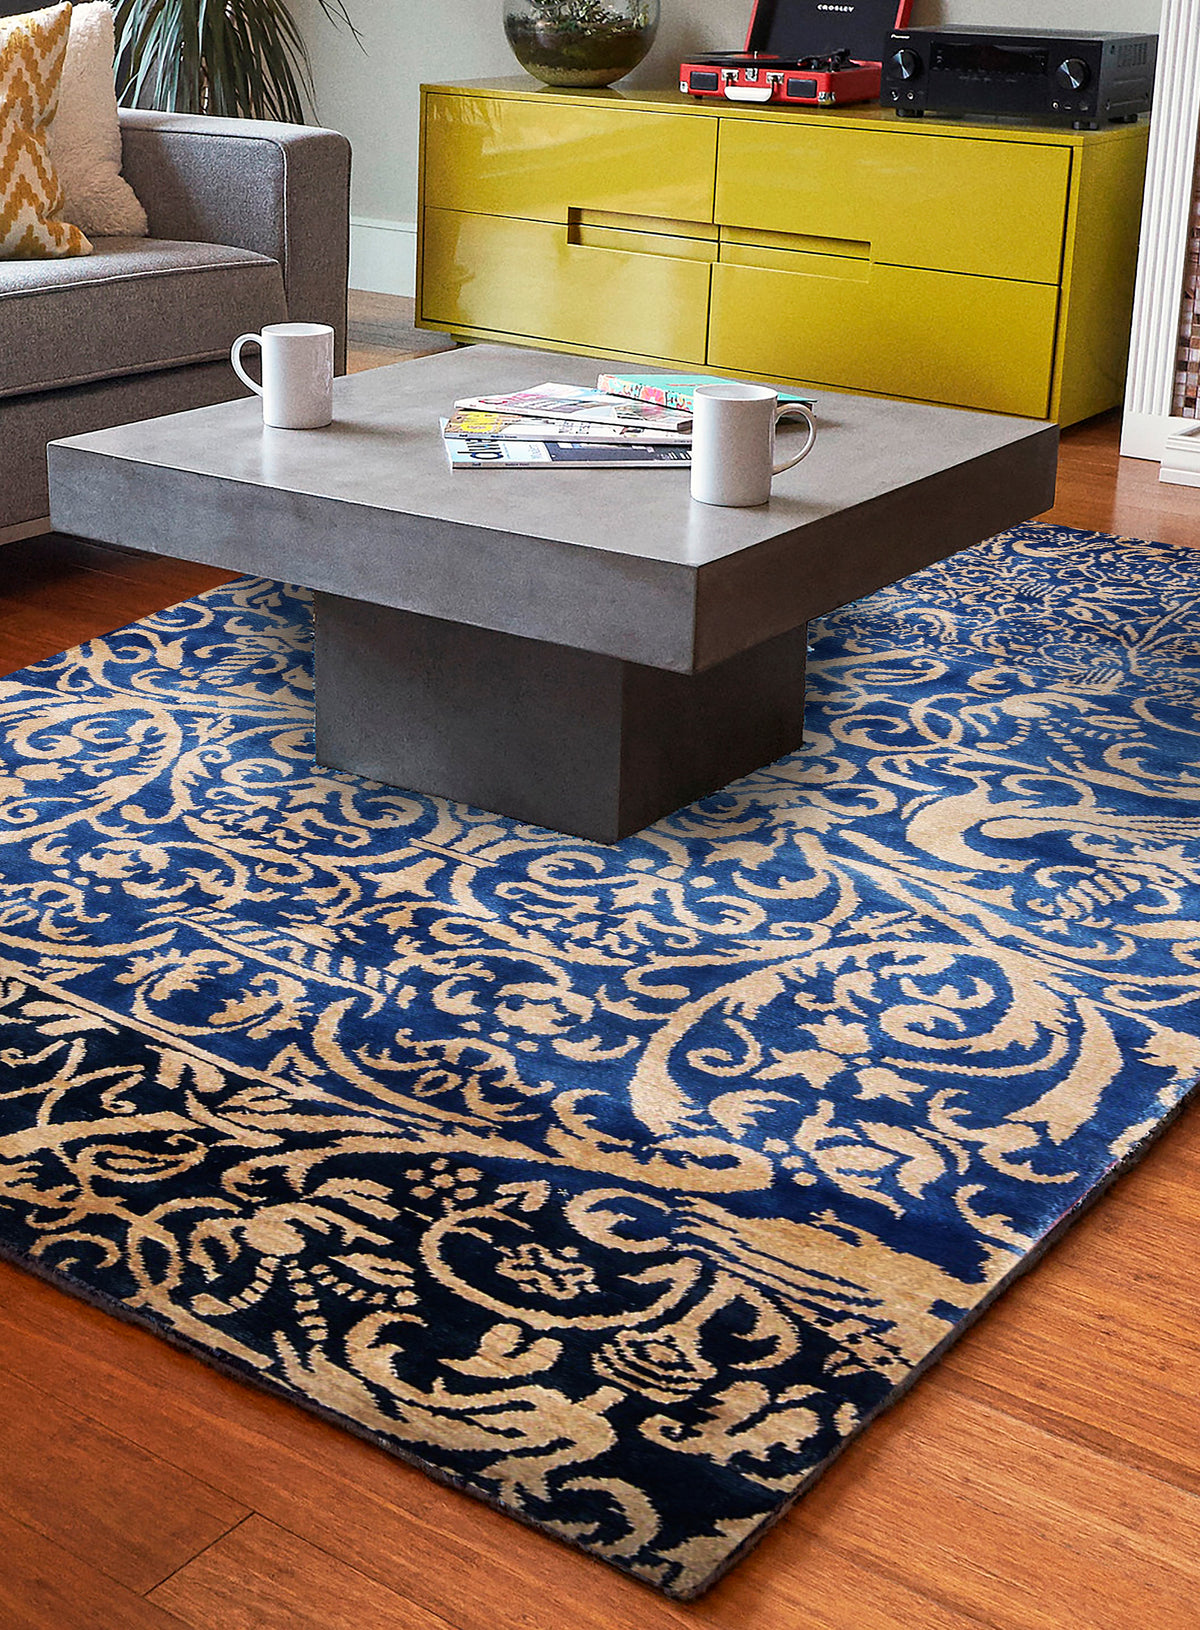 Rugs for Sale - Discounted Carpets On Sale in India